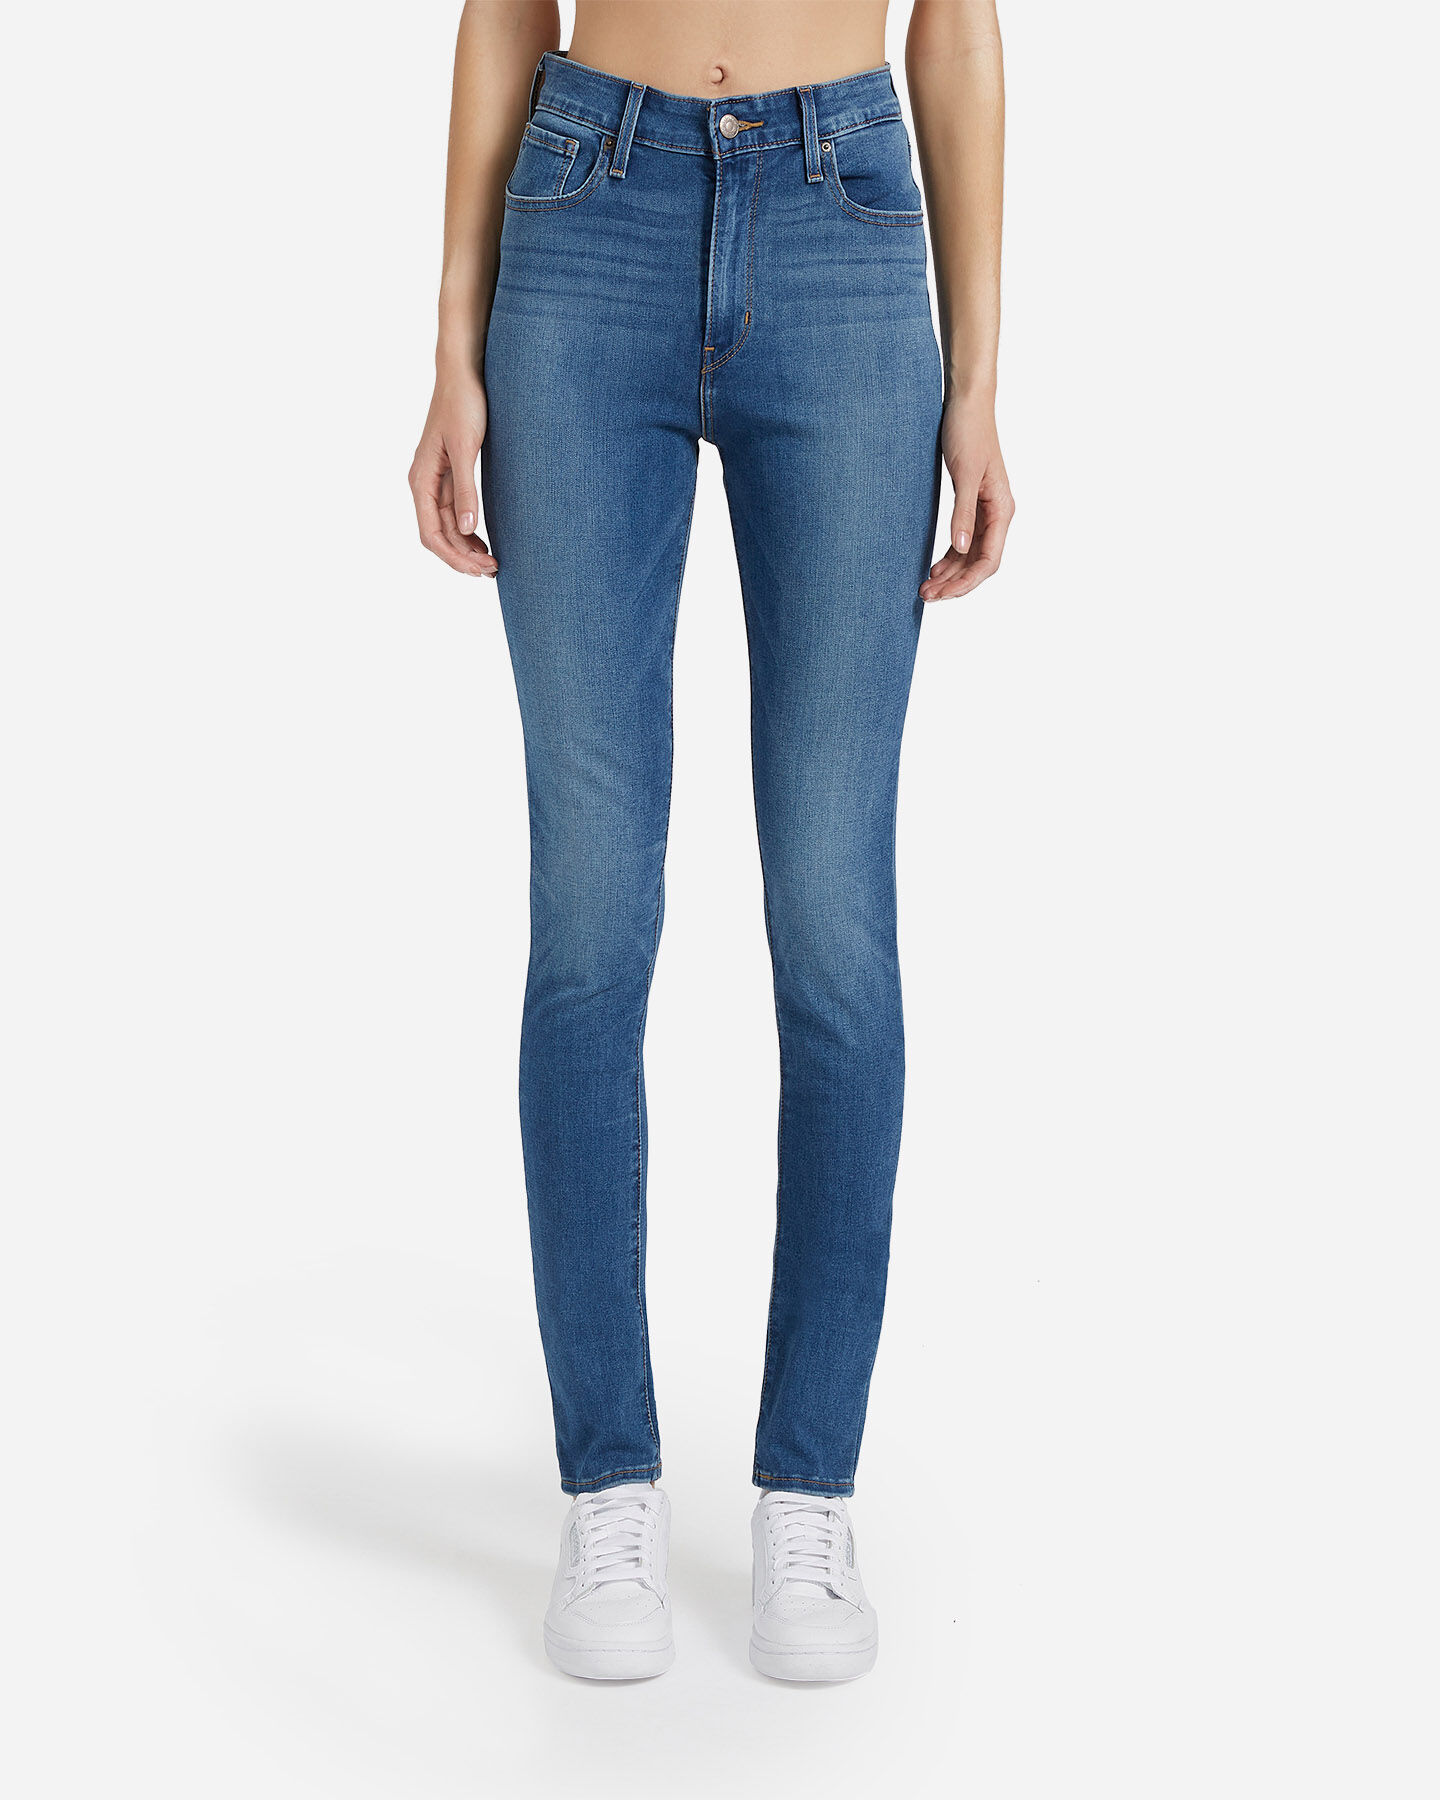  Jeans LEVI'S 721 HIGH RISE SKINNY W S4077782|0293|26 scatto 0